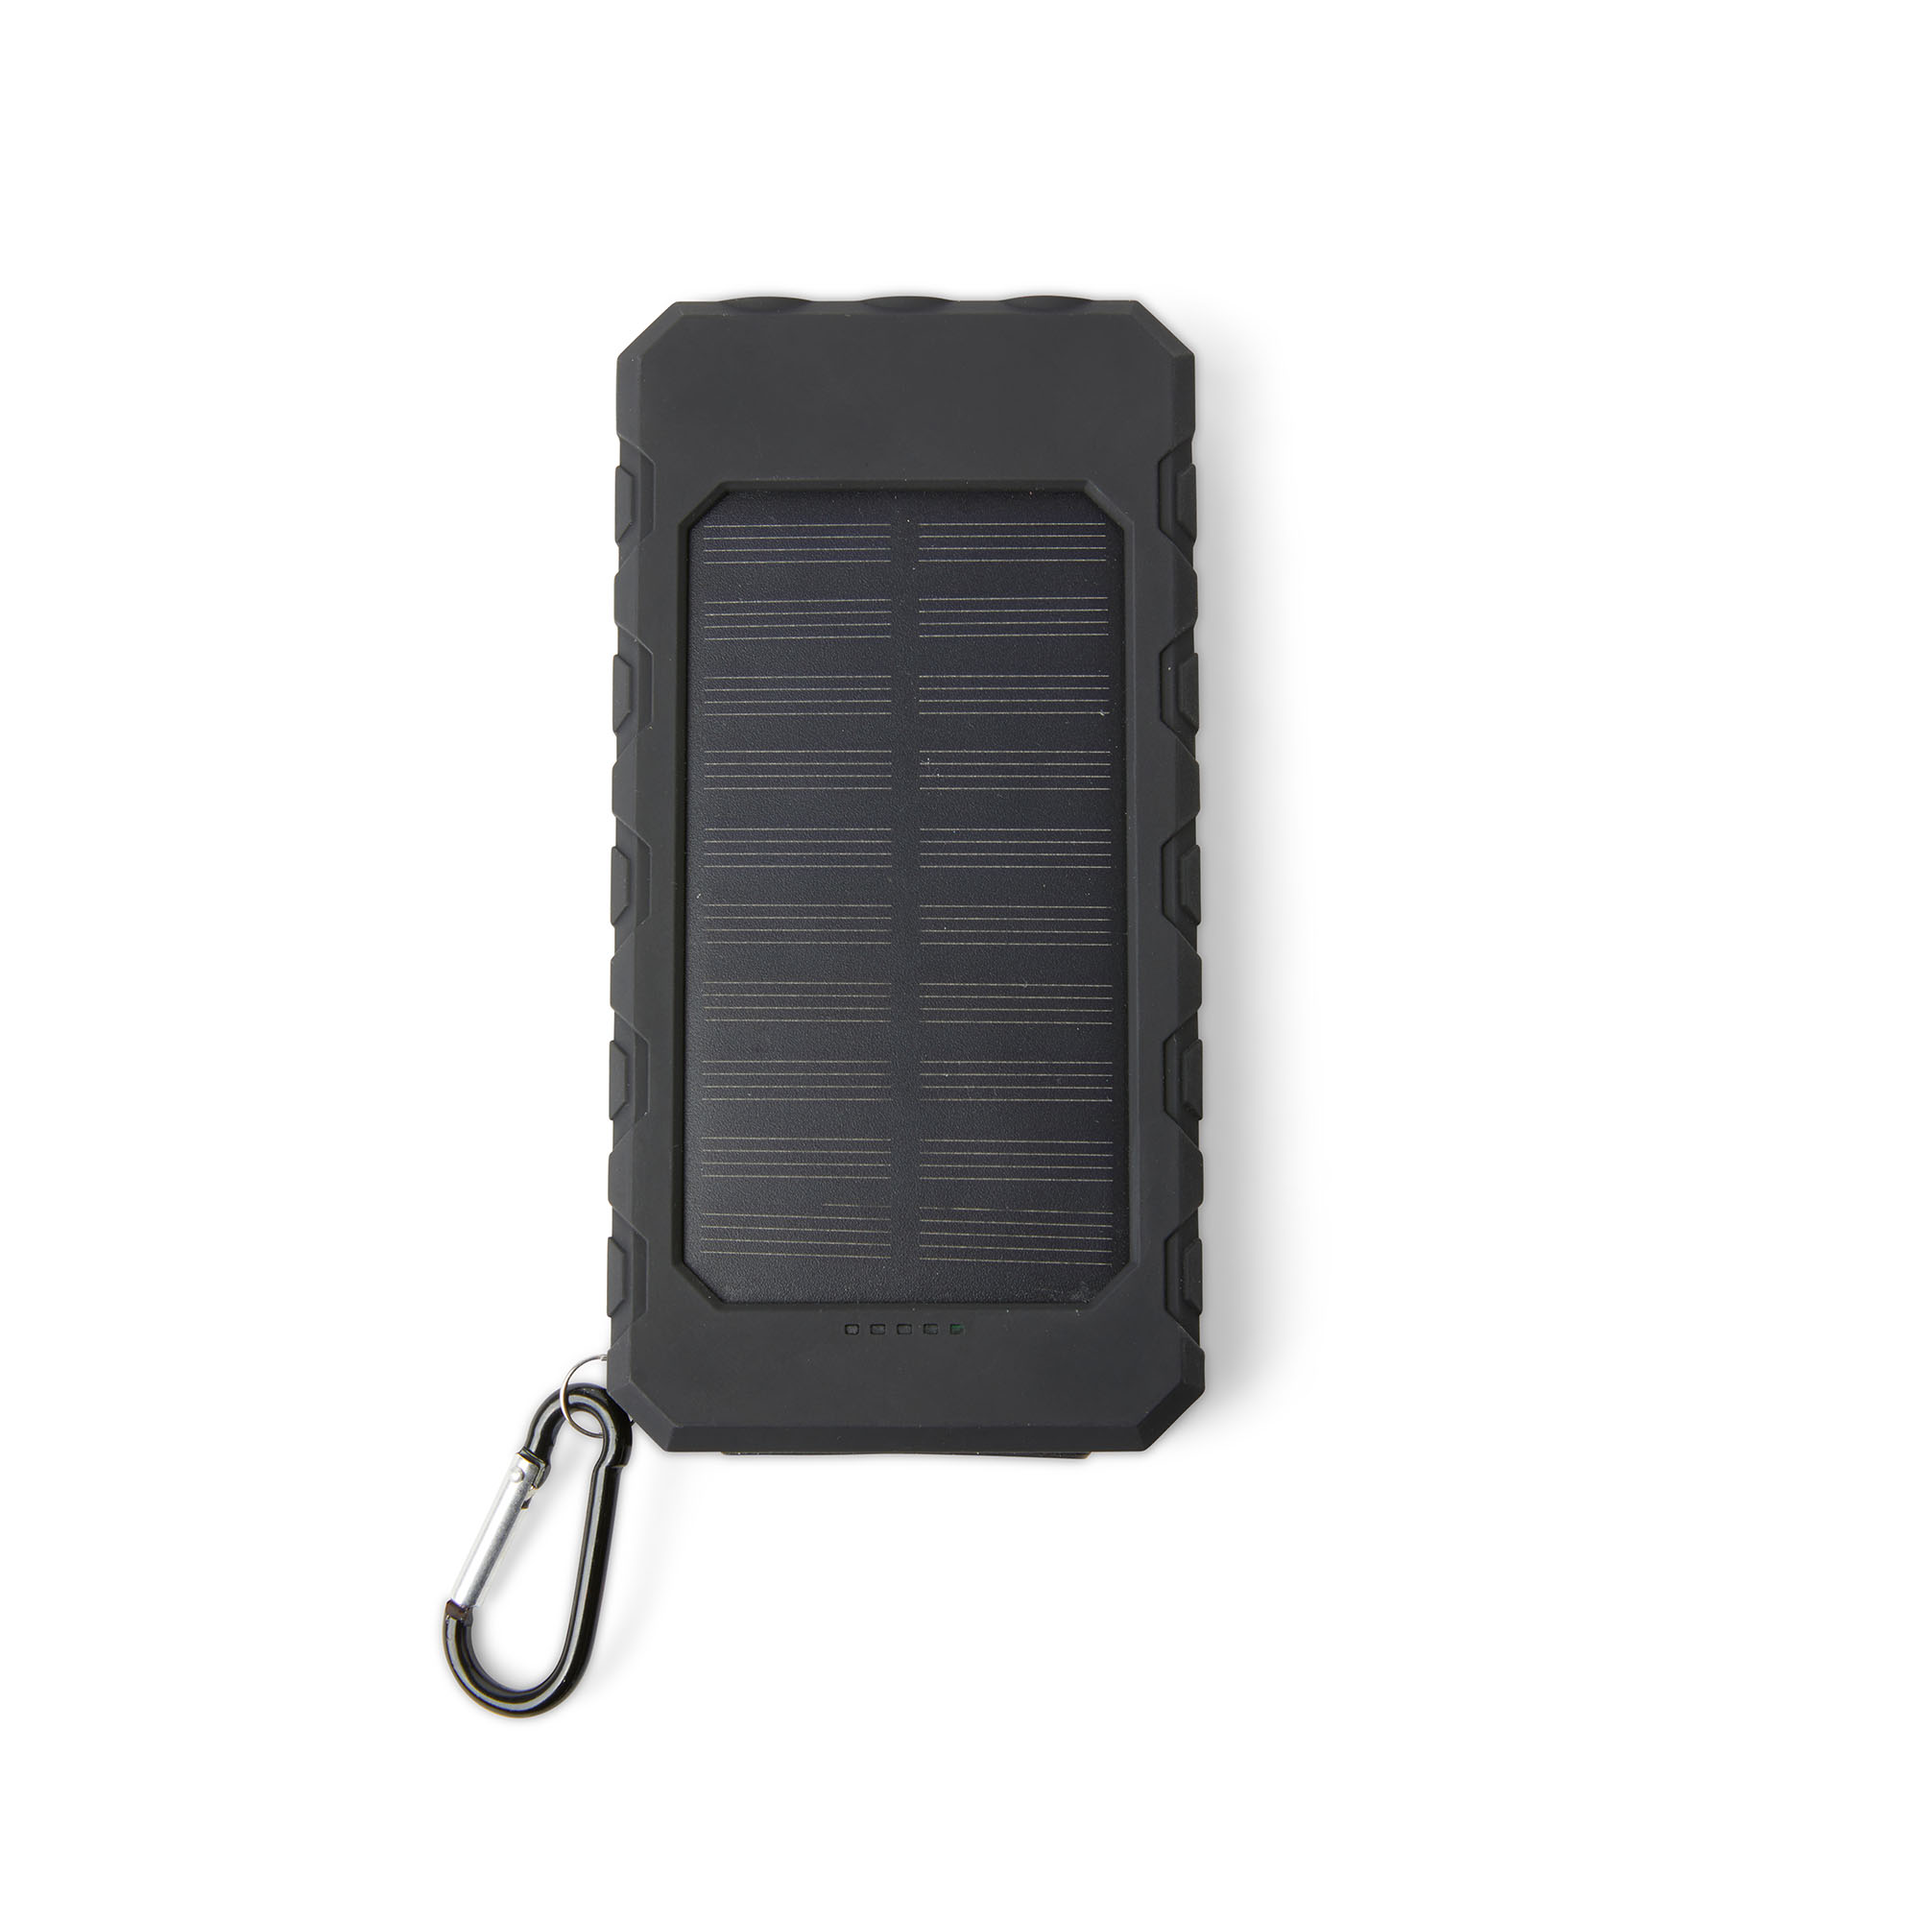 Power Bank Solare Con Torcia 8000 Mah, , large